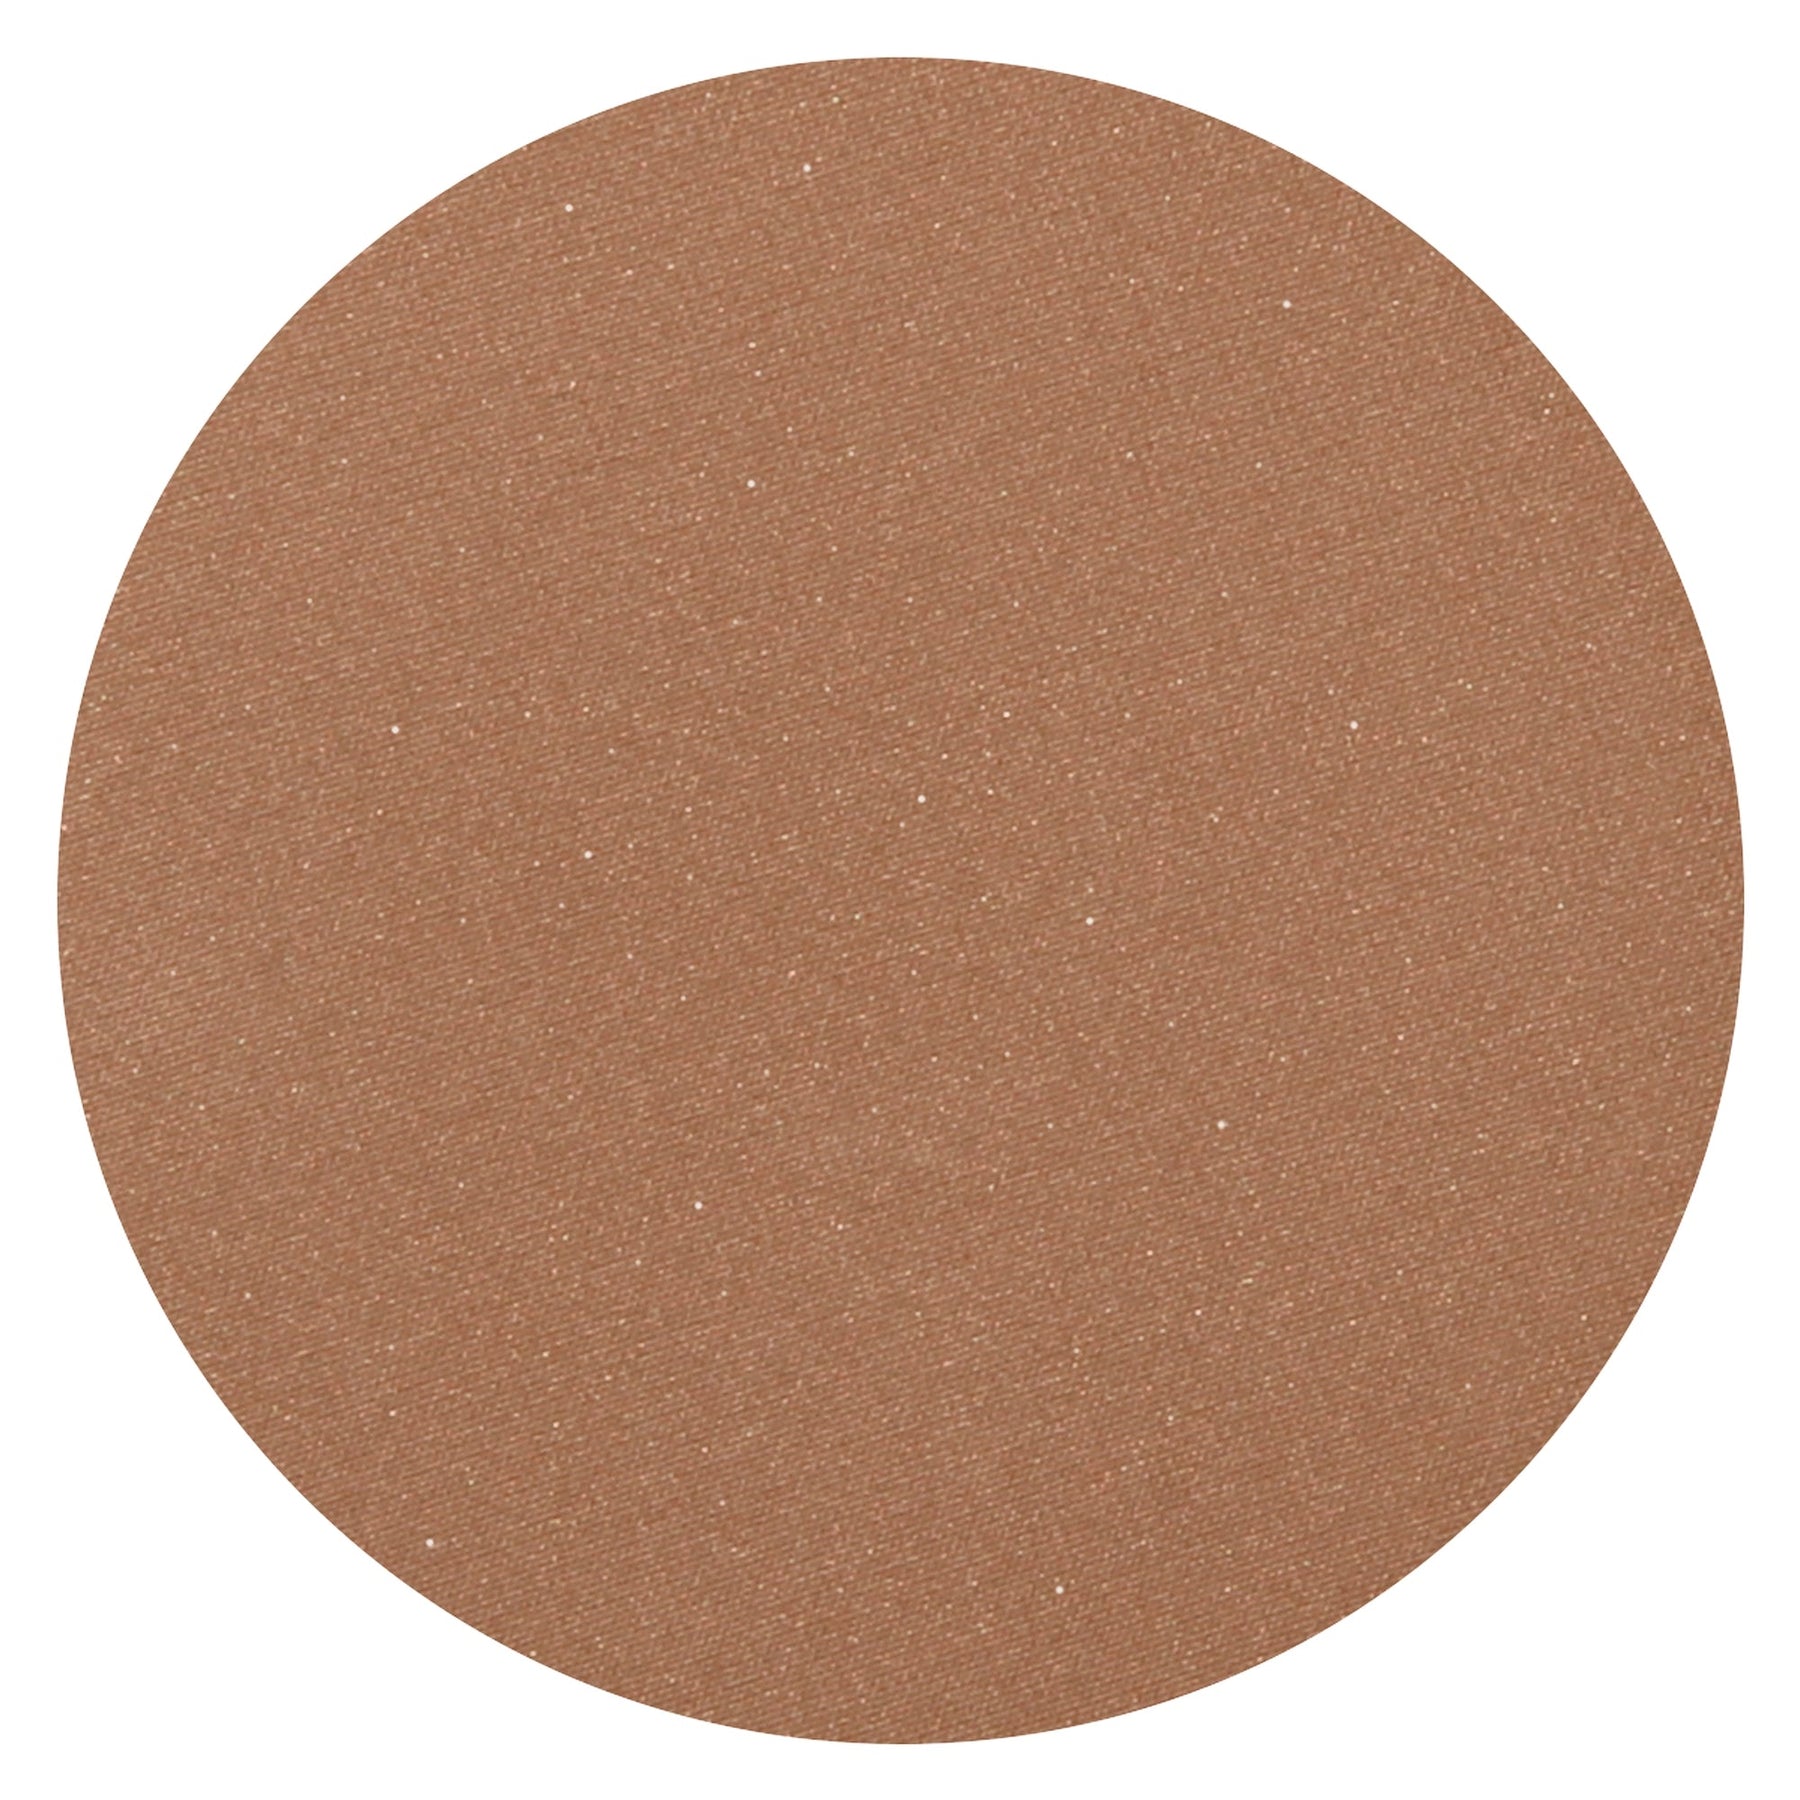 Mineral Fusion - Bronzer - by Mineral Fusion |ProCare Outlet|